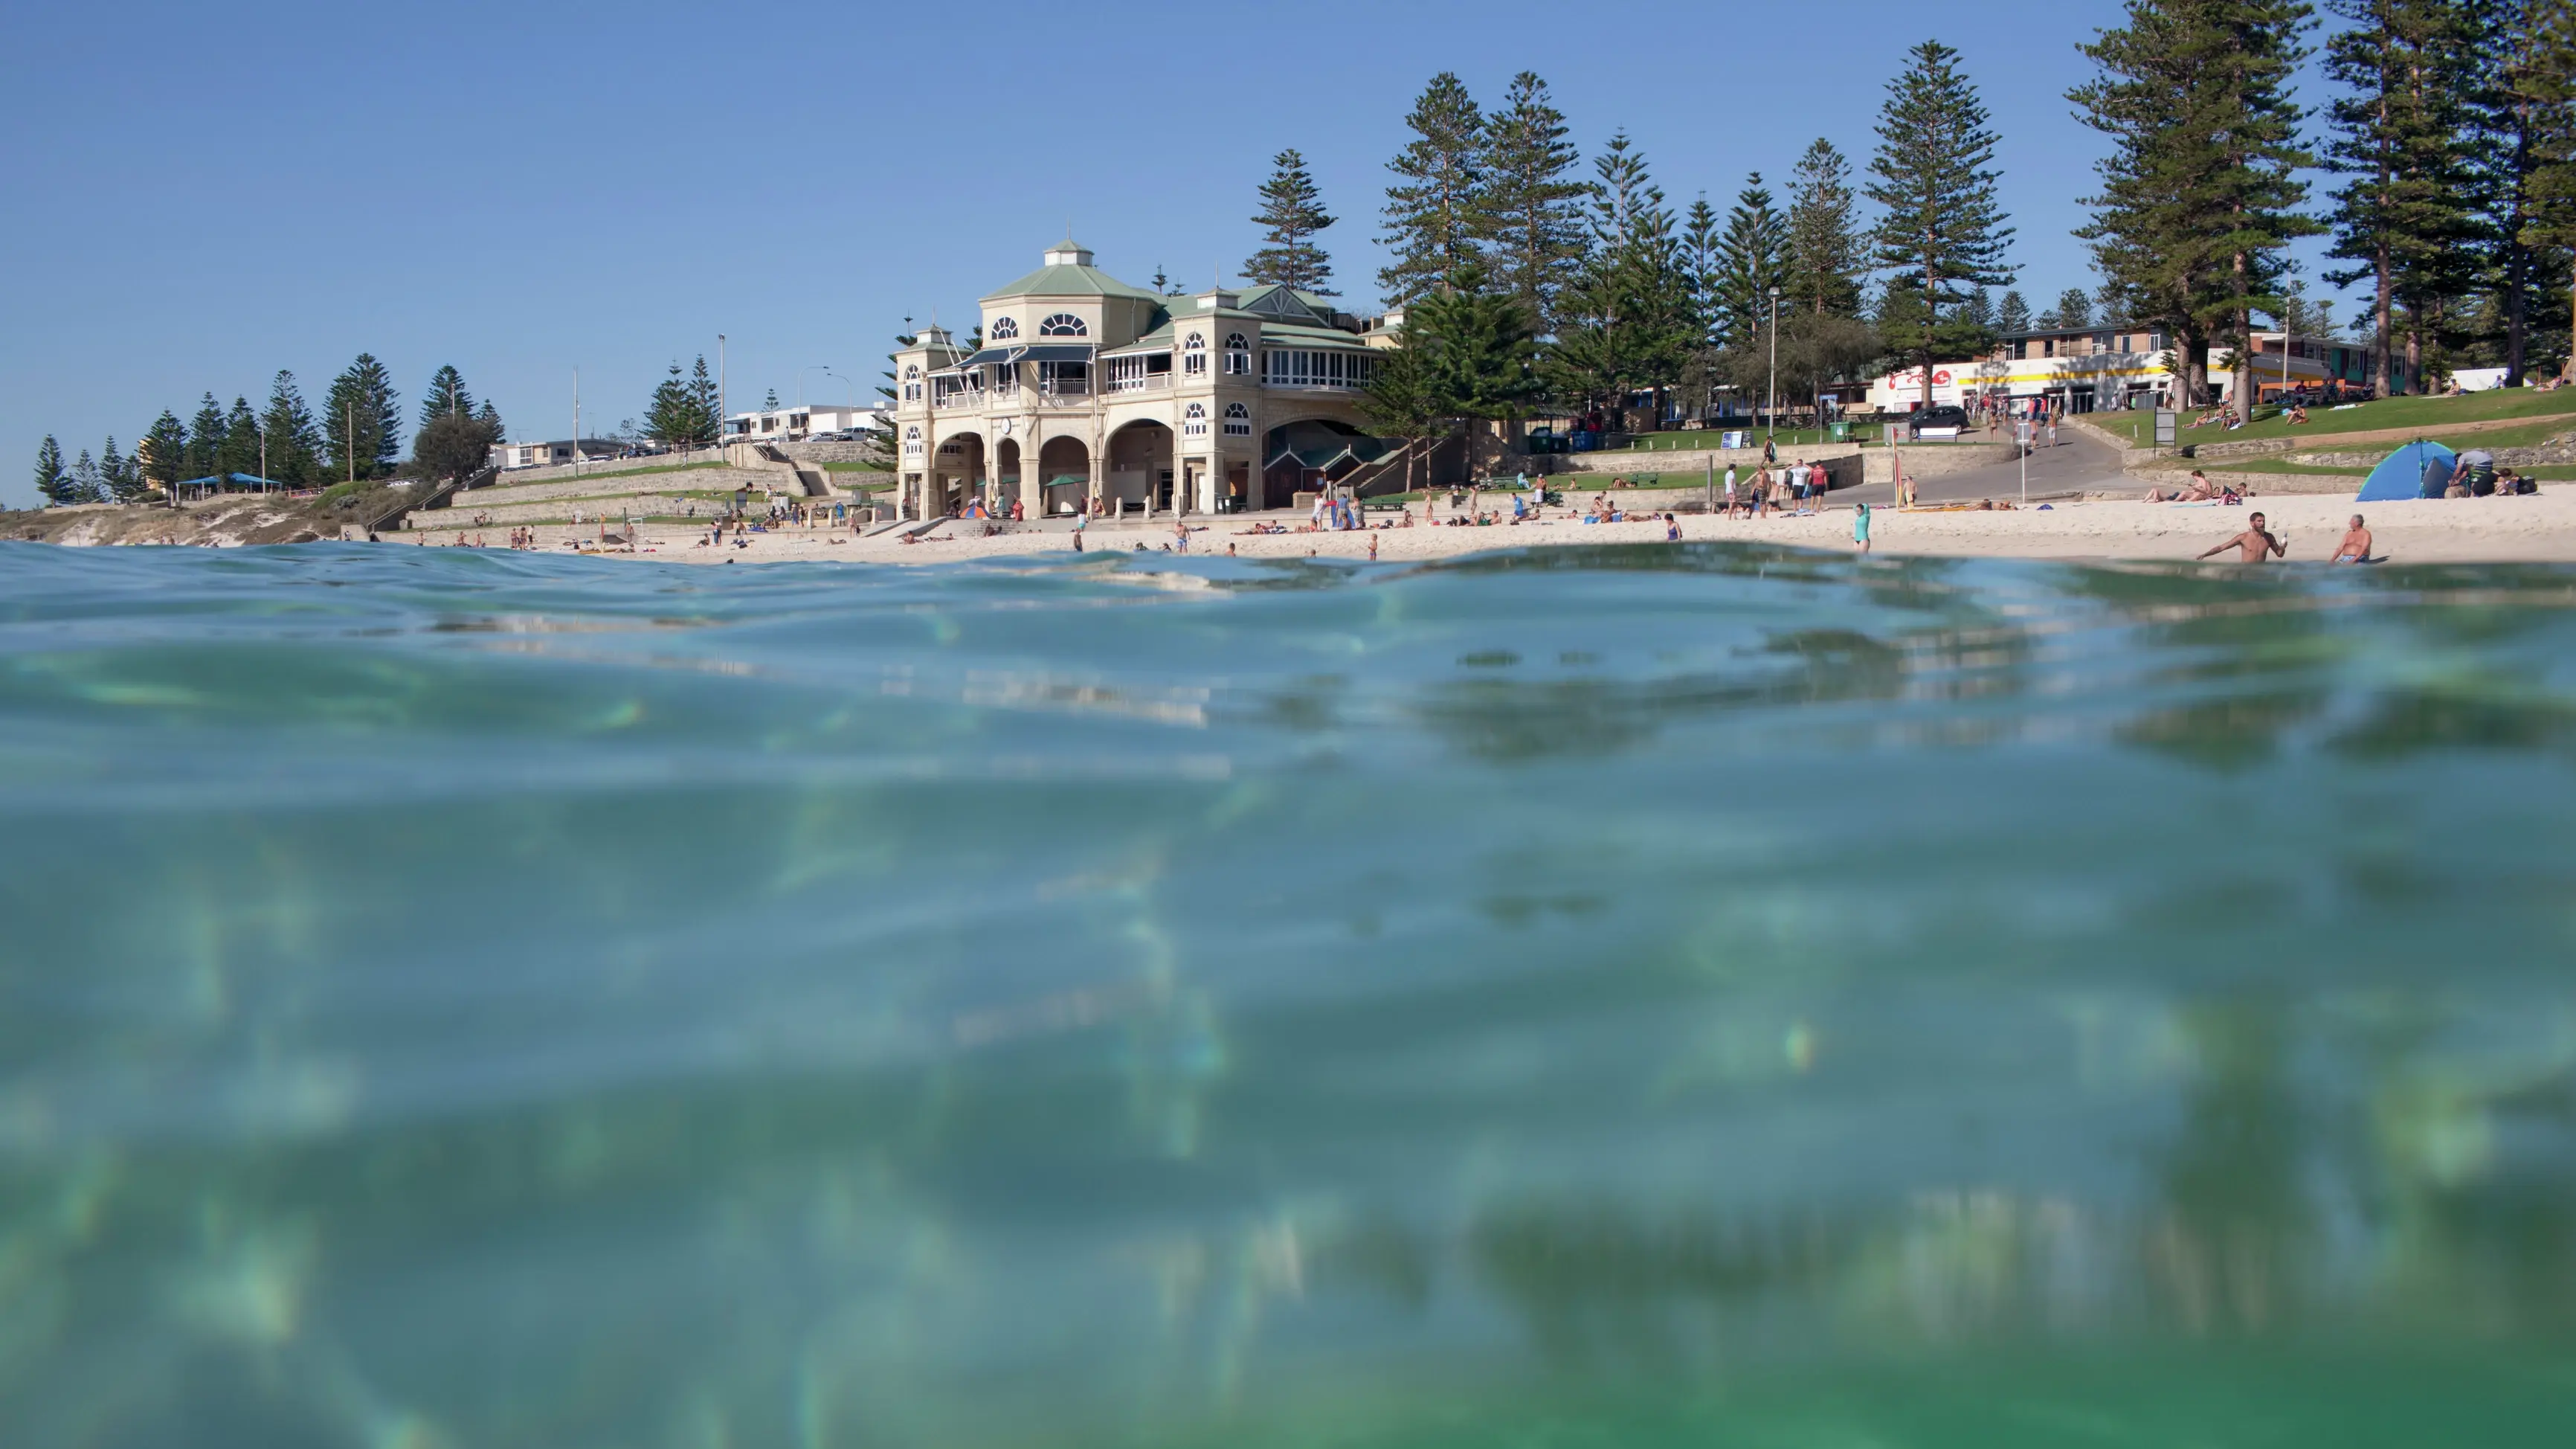 View of Cottesloe Beach and Indiana Tea House, Perth, Western Australia. Image credit: Tourism Western Australia